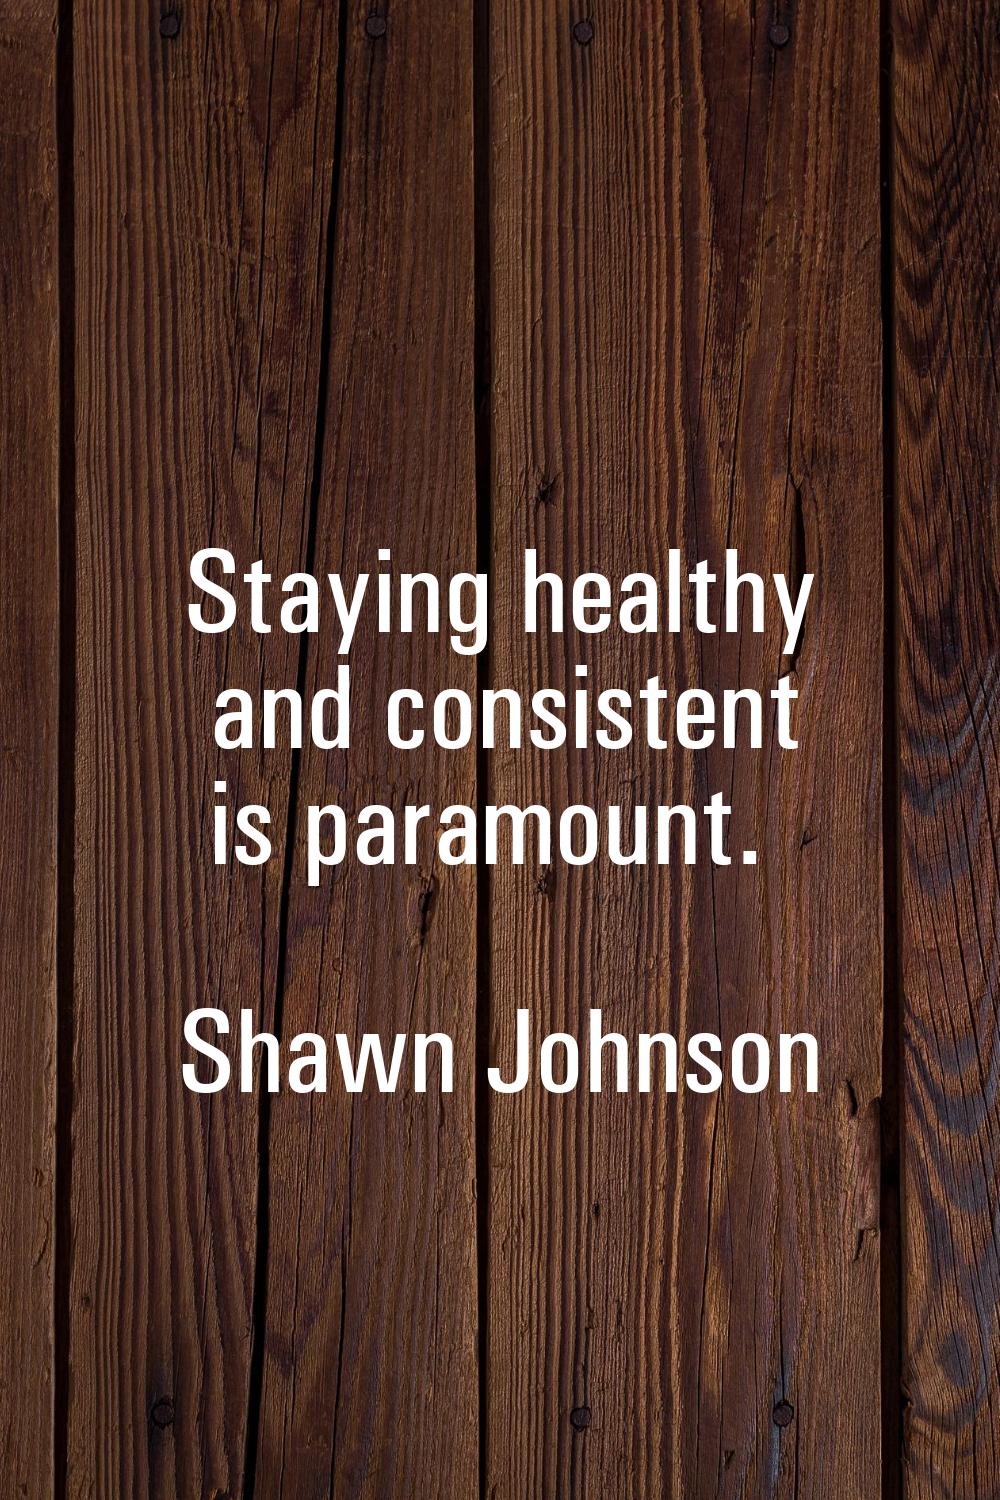 Staying healthy and consistent is paramount.